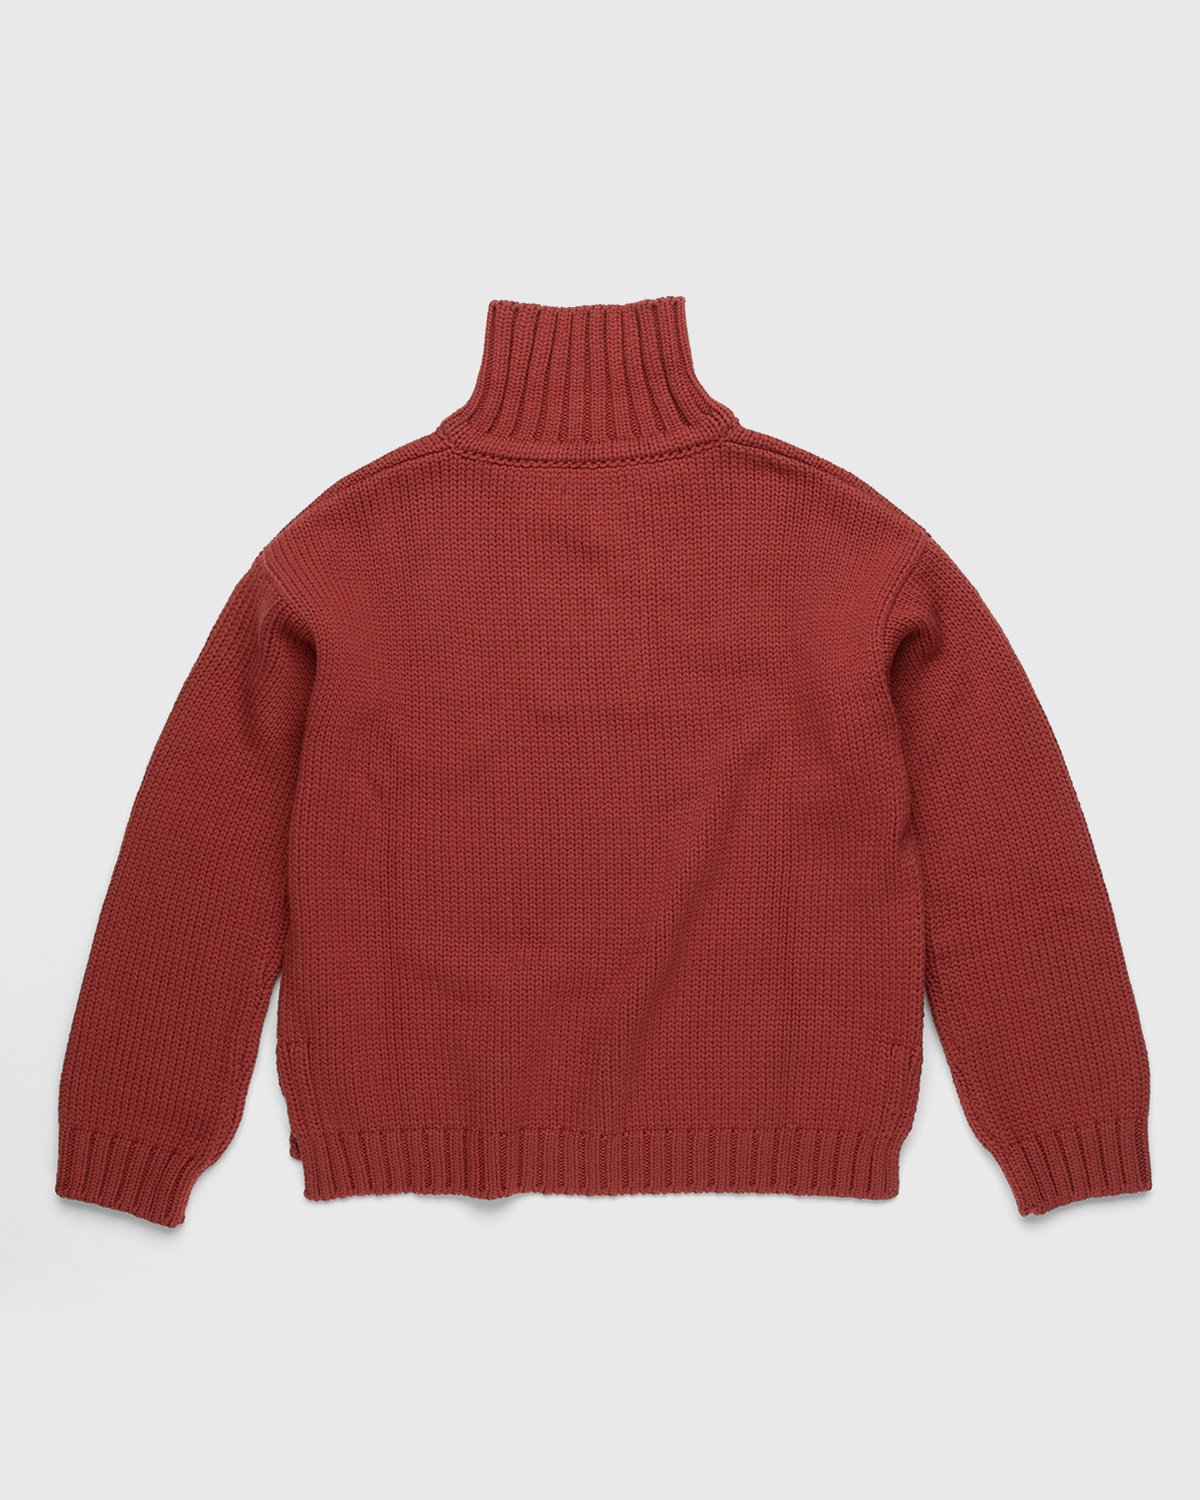 Phipps - Vareuse Sweater Rust - Clothing - Red - Image 2